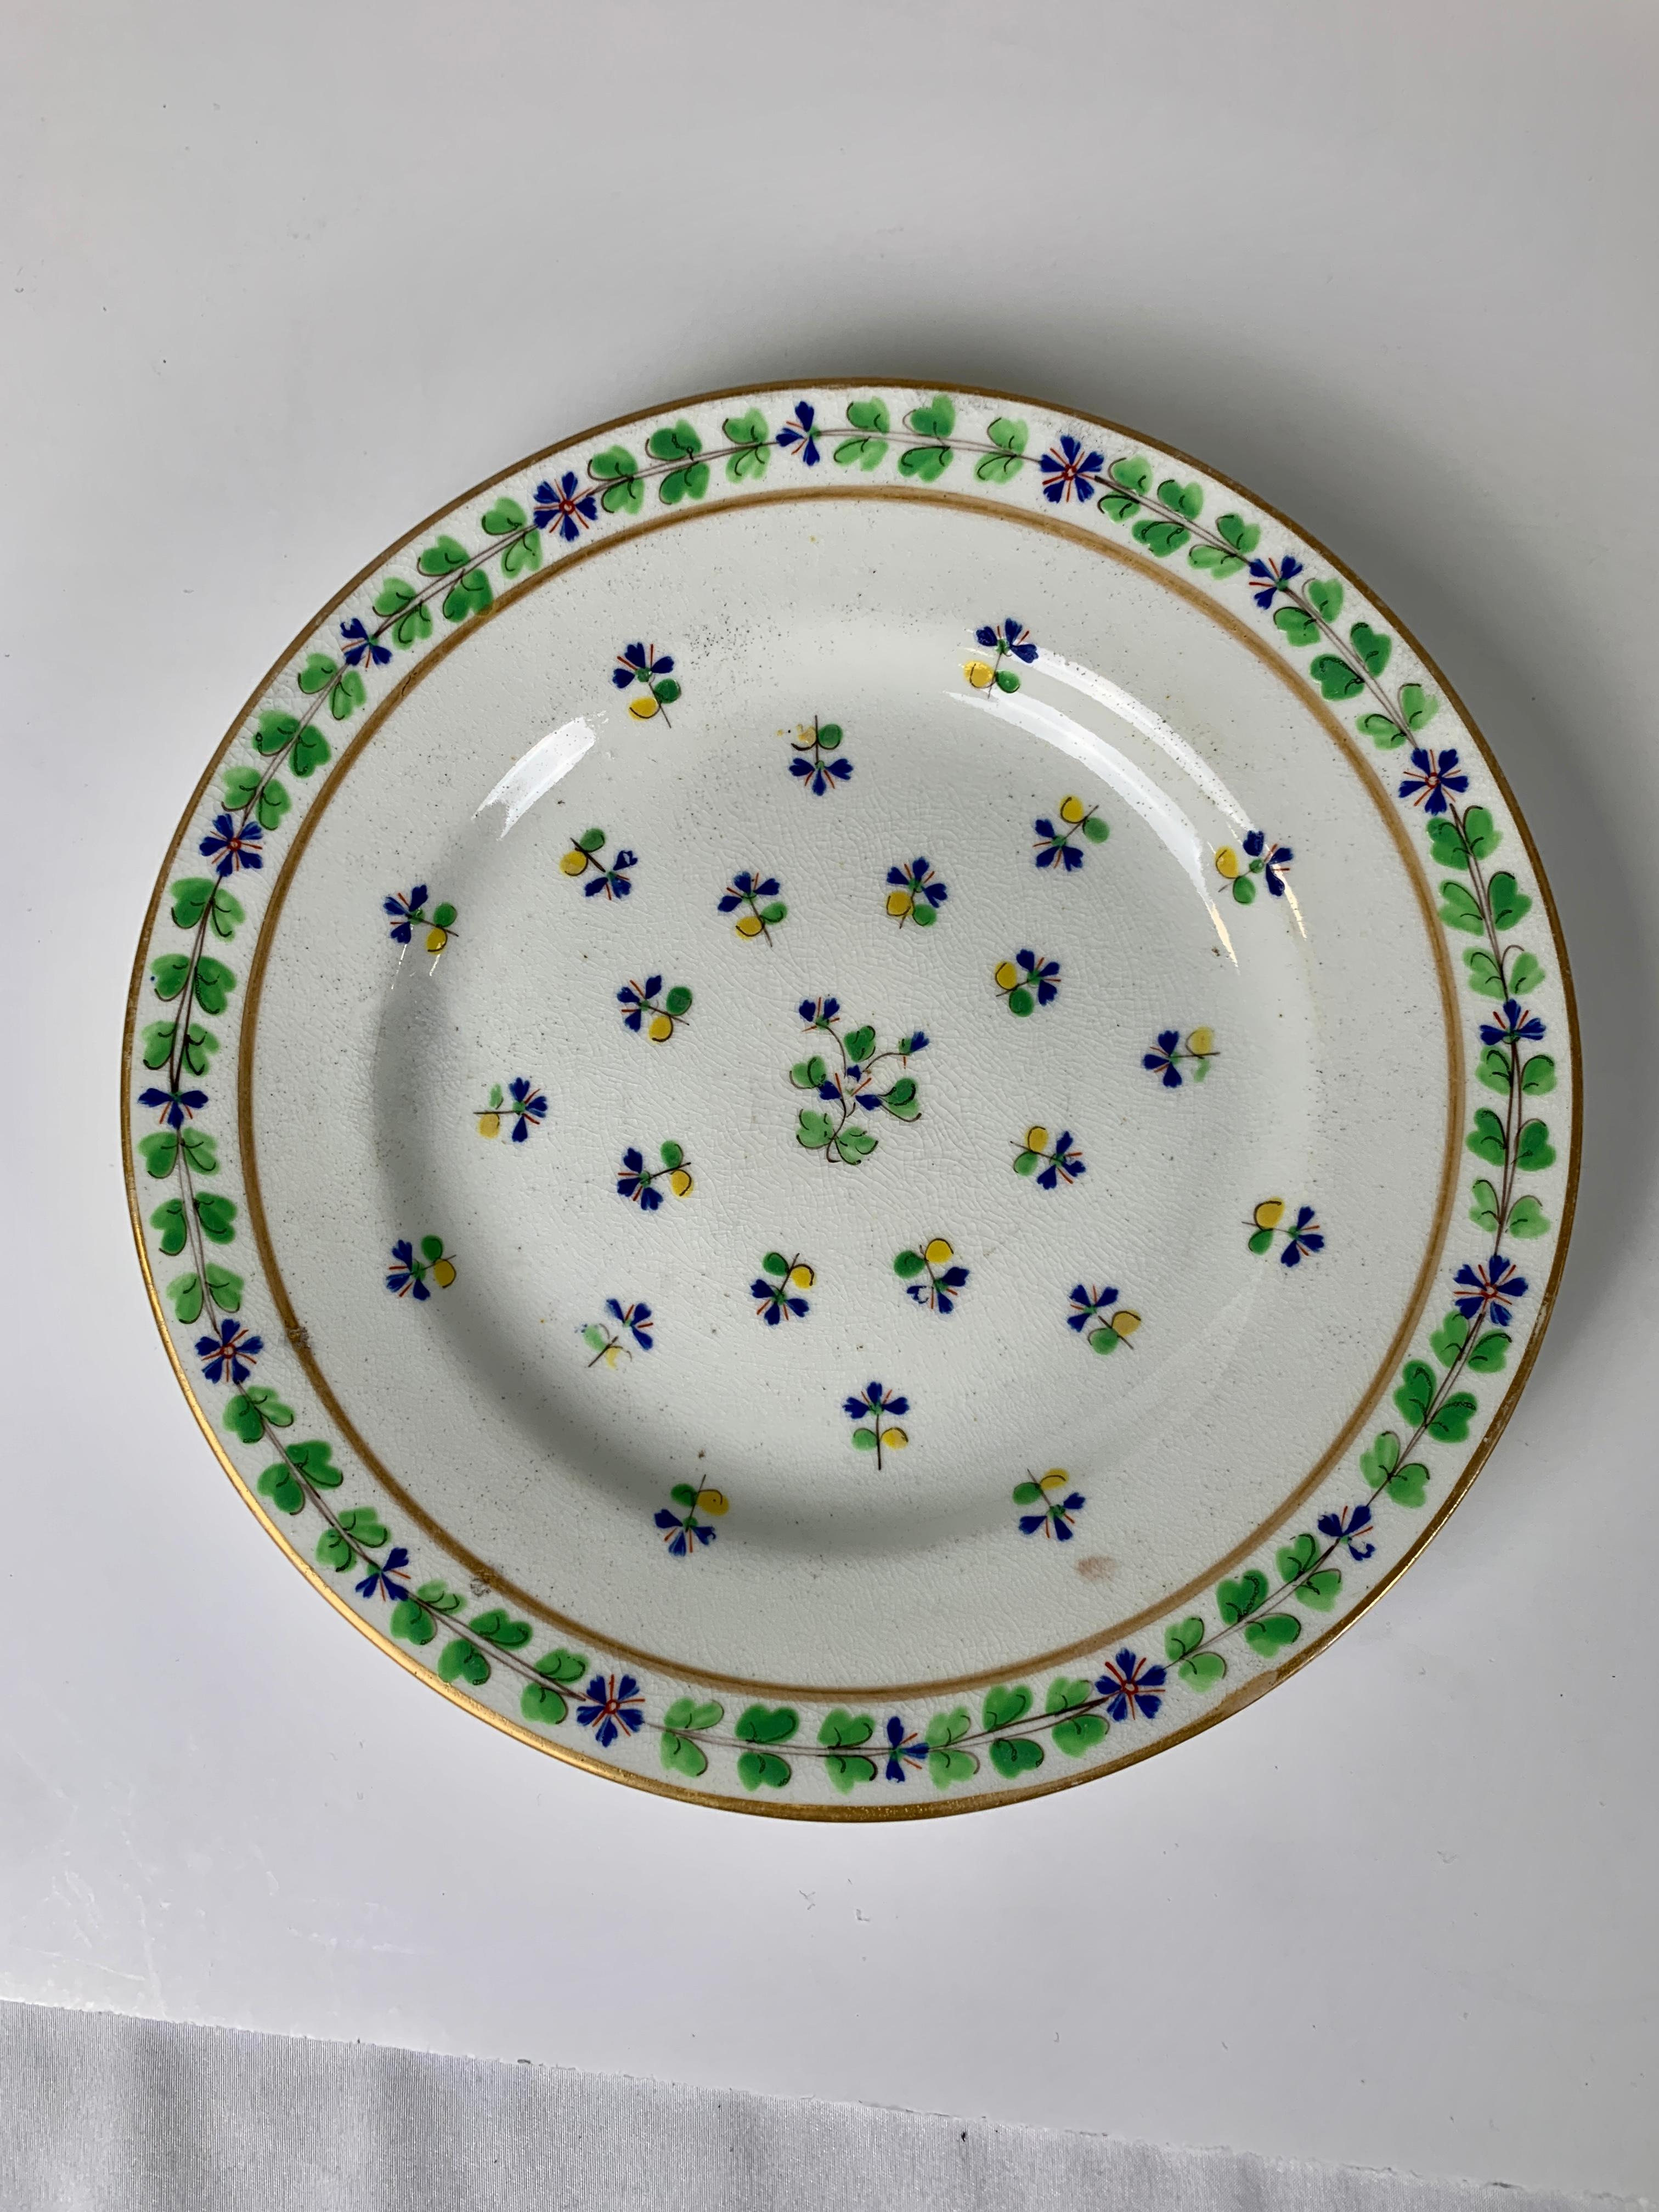 Enameled Four Derby Porcelain Dishes Hand Painted in Sprig Pattern, England, circa 1815